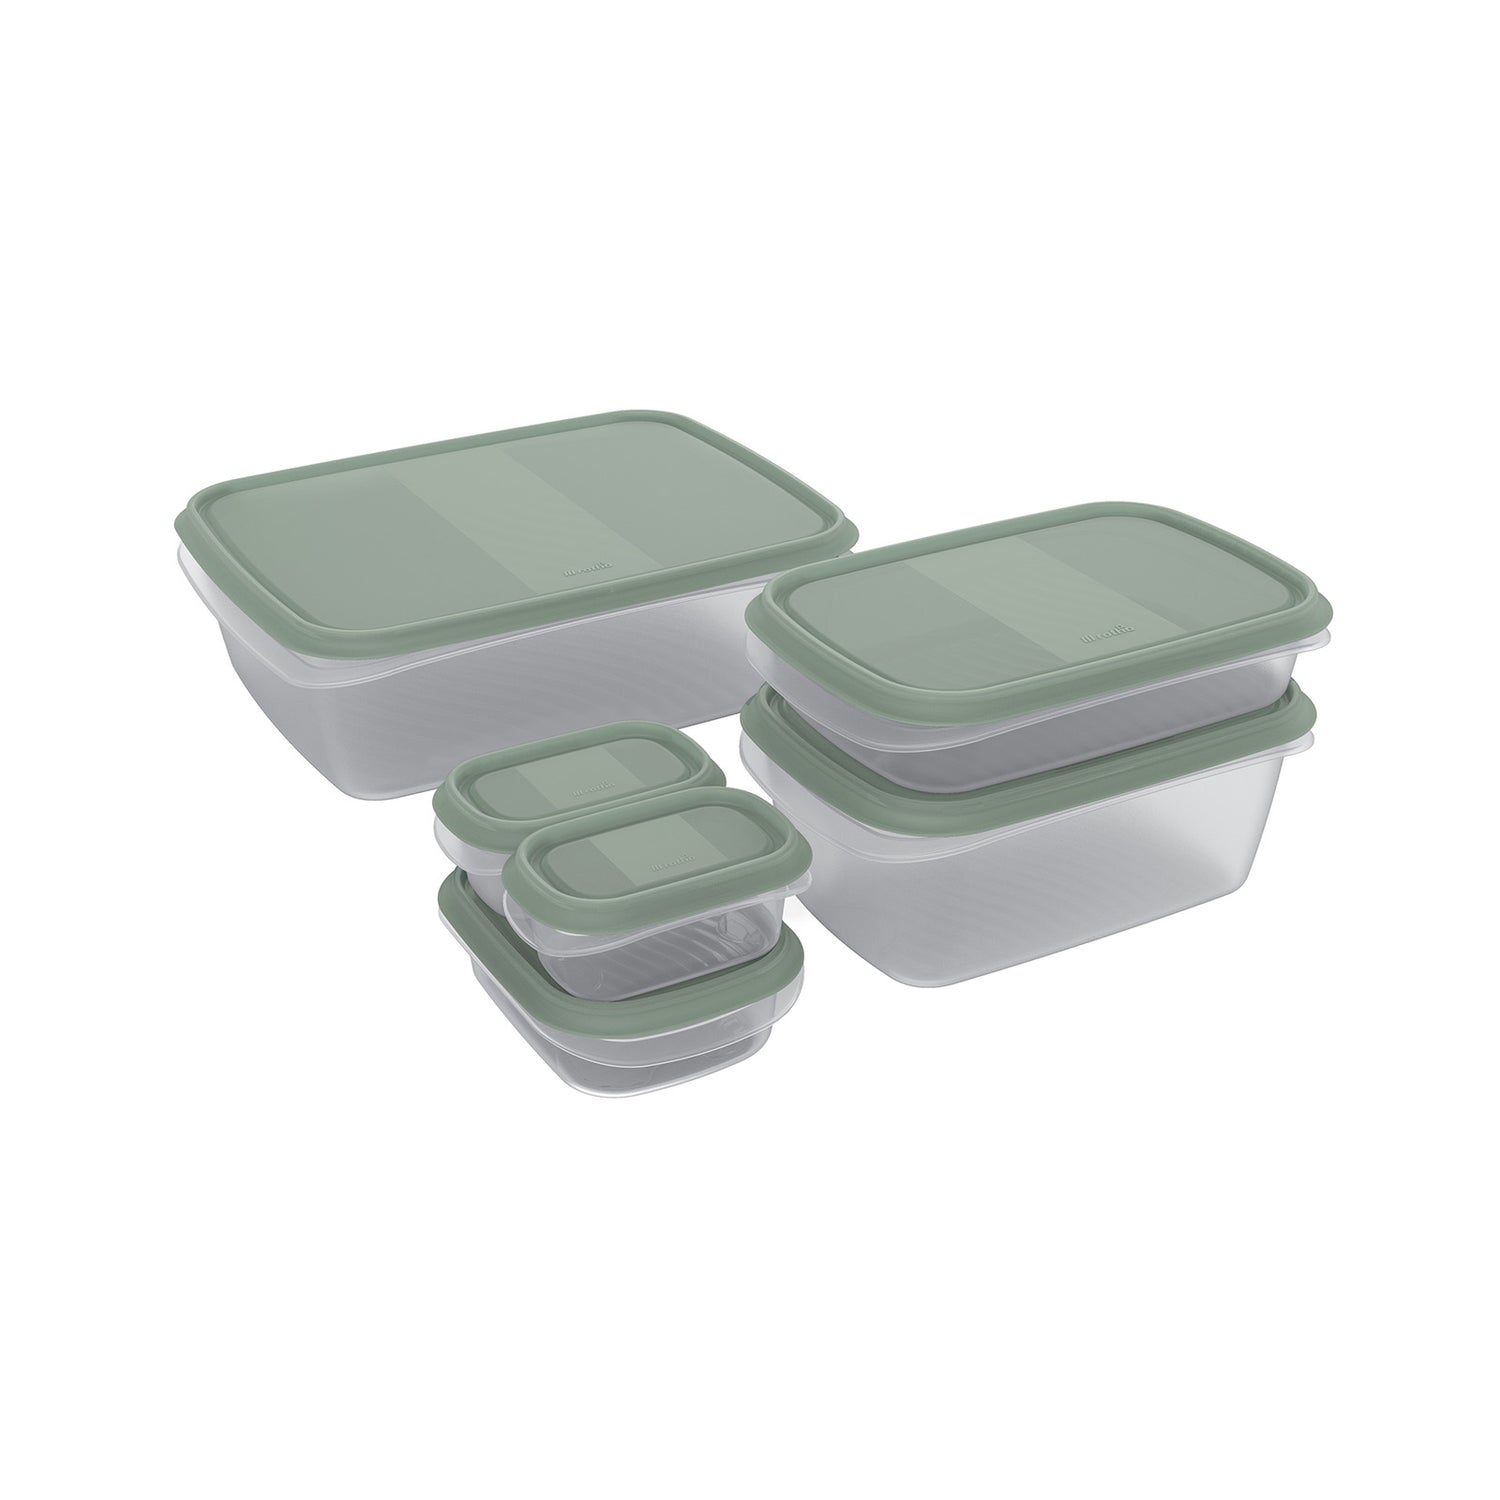 Set of freshness containers 6 pcs. ELEMENTS